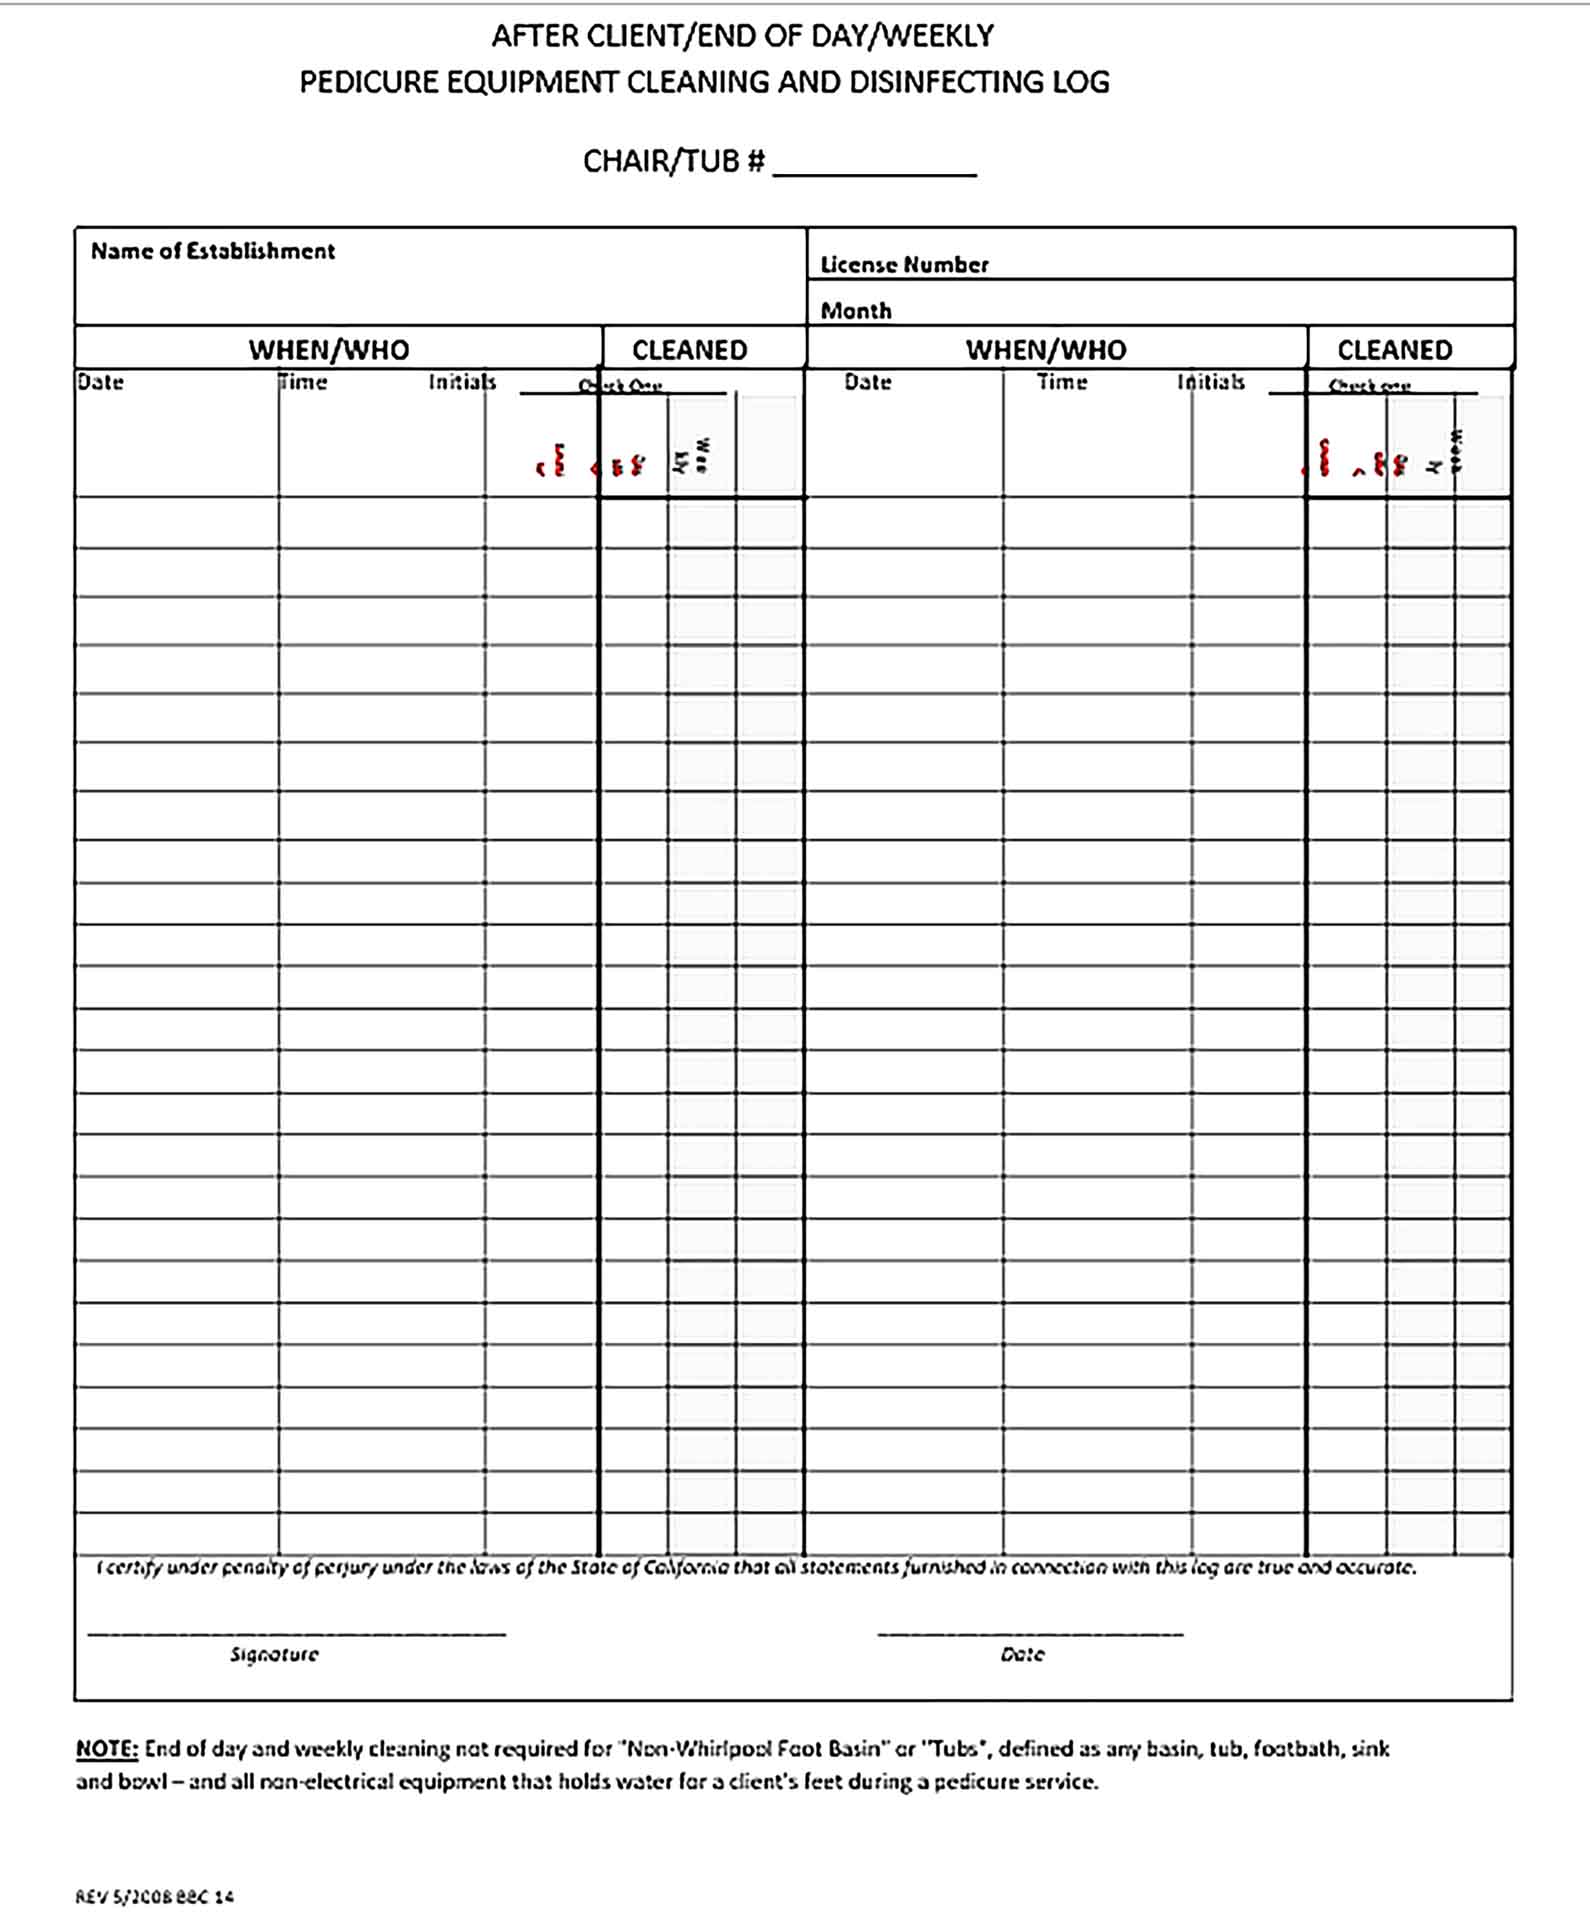 Template Pedicure Equipment Cleaning Log Sample